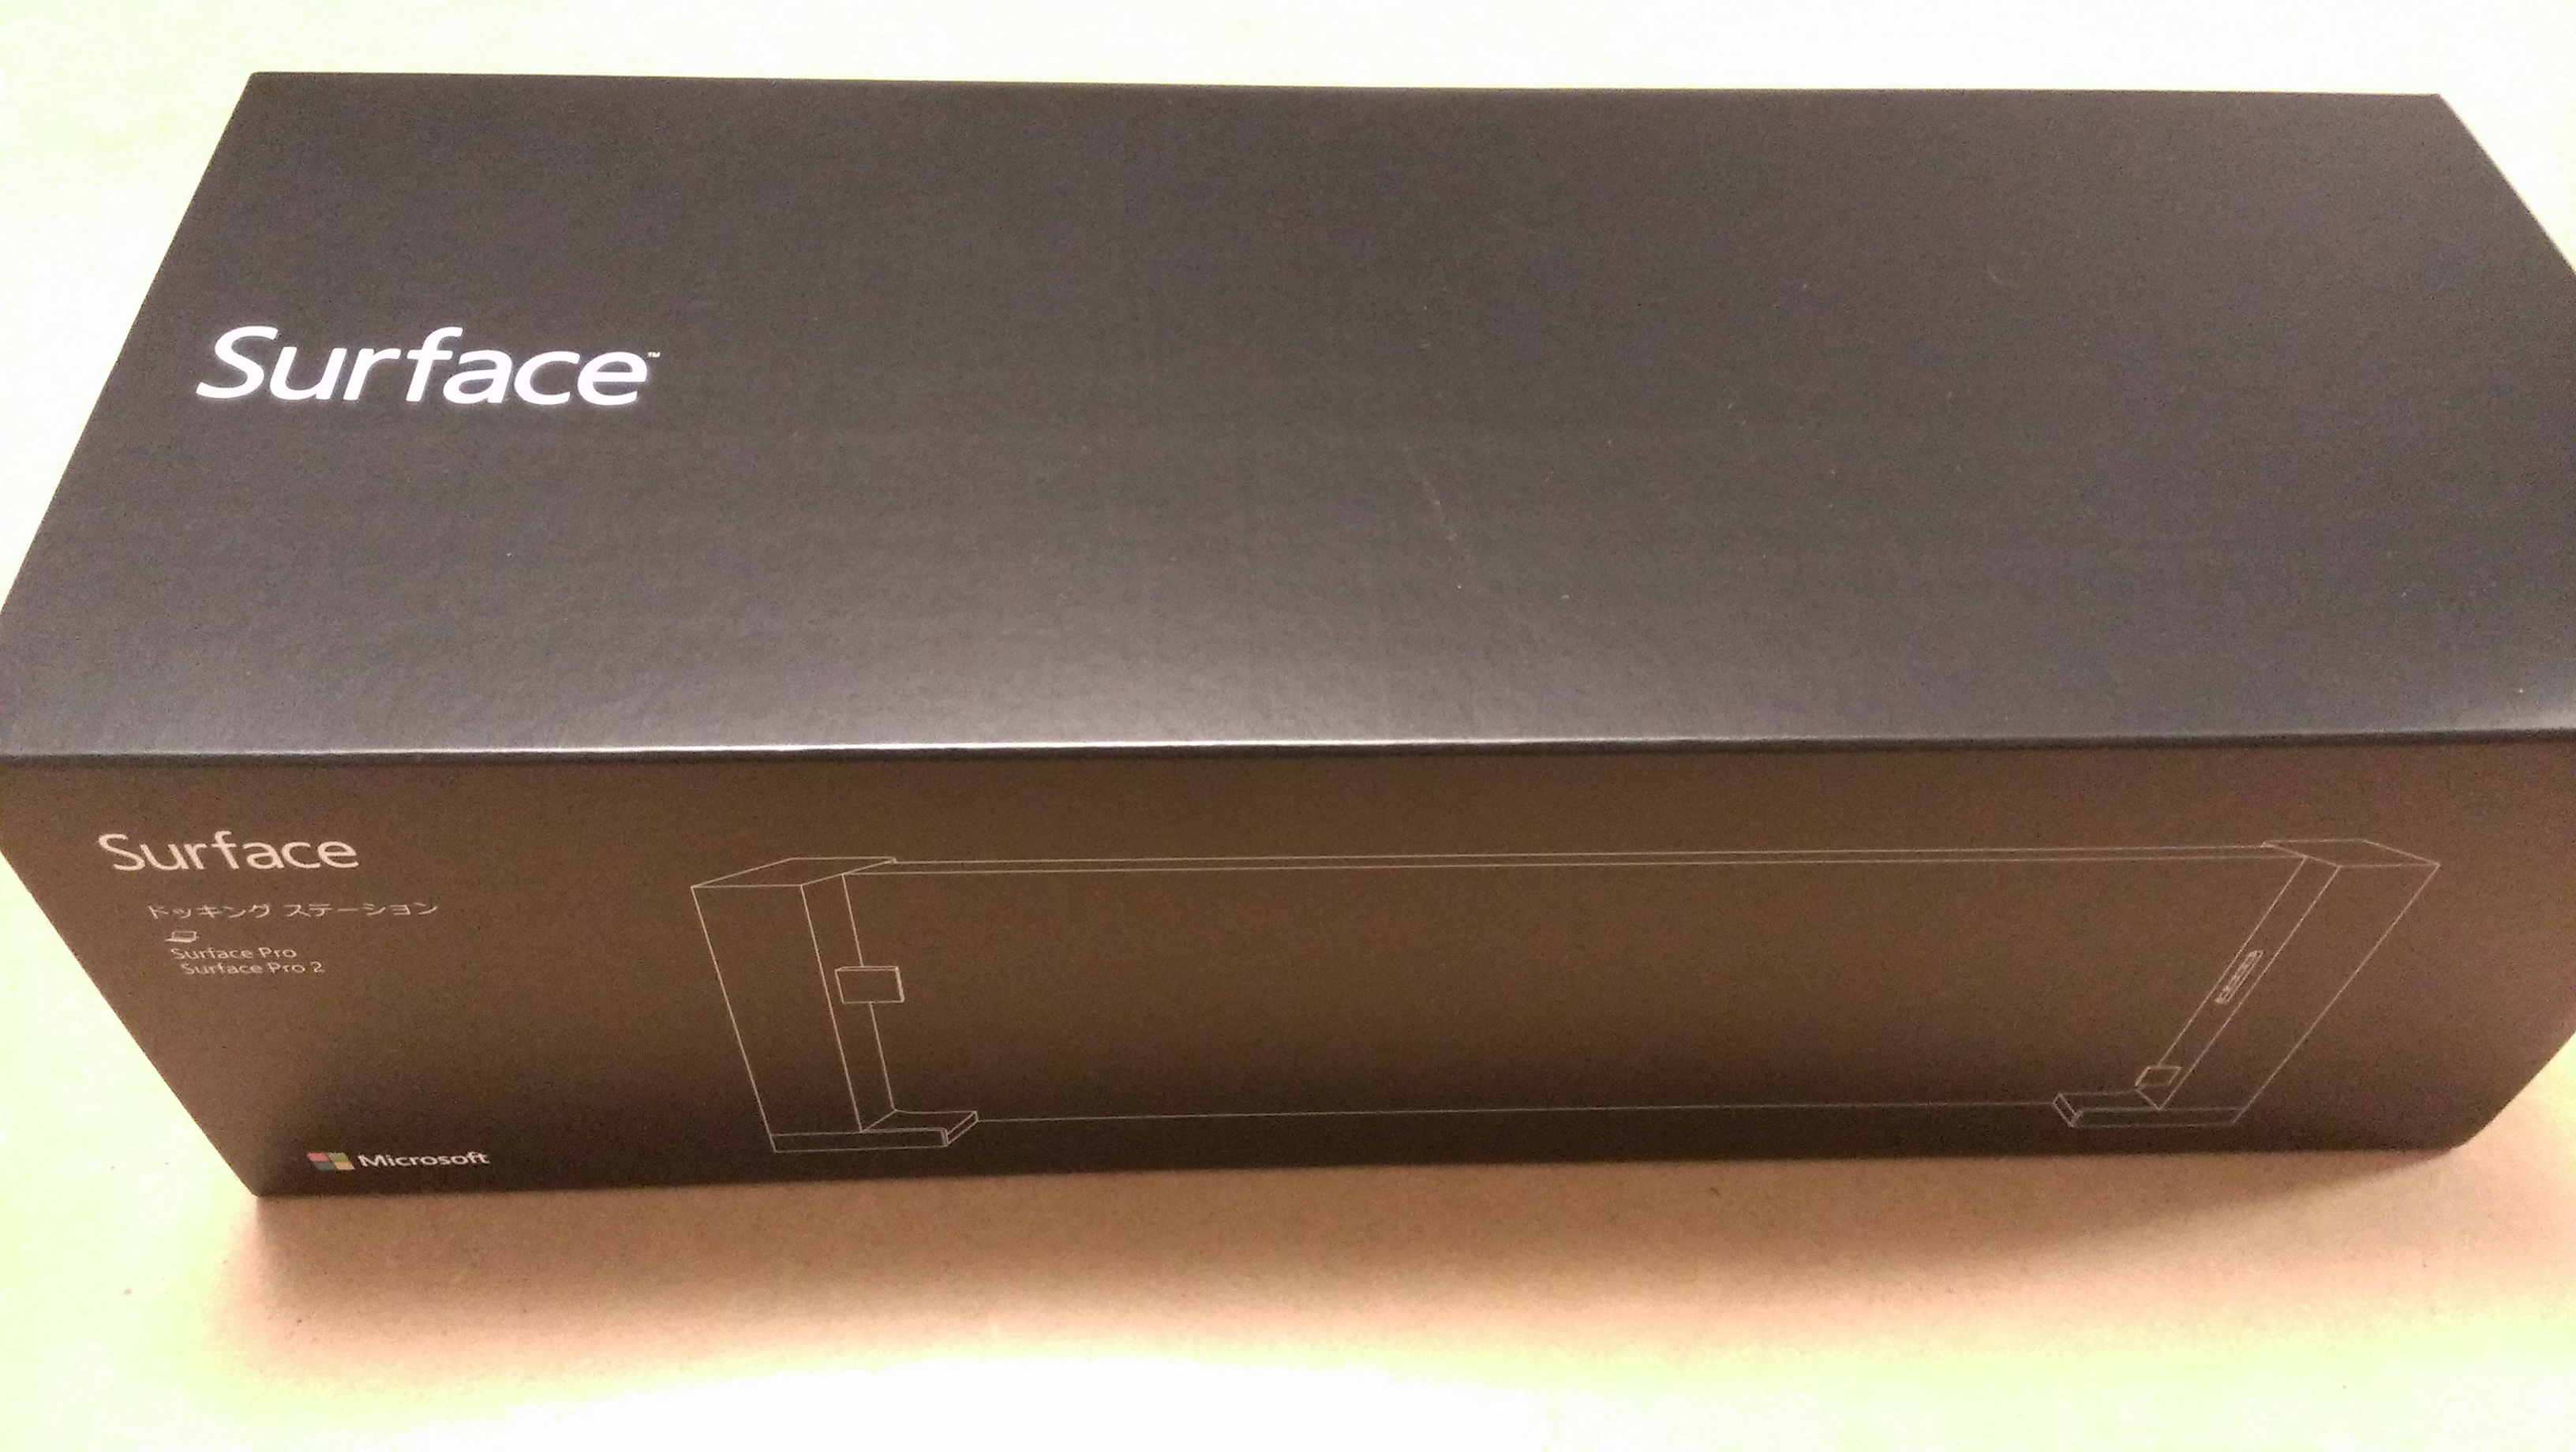 Docking Station for Surface Pro買ったが… | Network Project 5